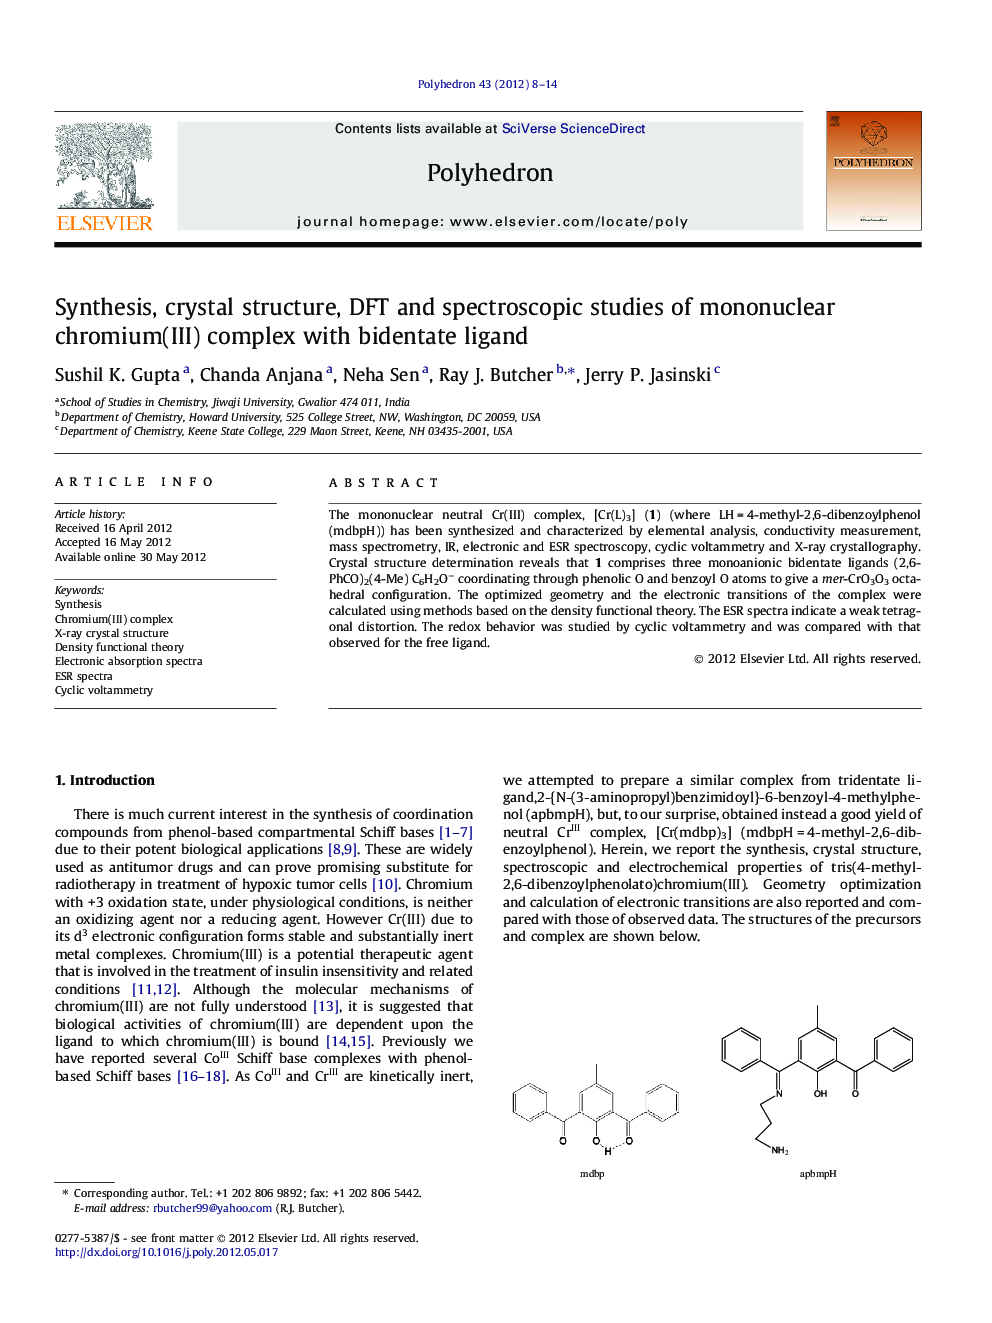 Synthesis, crystal structure, DFT and spectroscopic studies of mononuclear chromium(III) complex with bidentate ligand